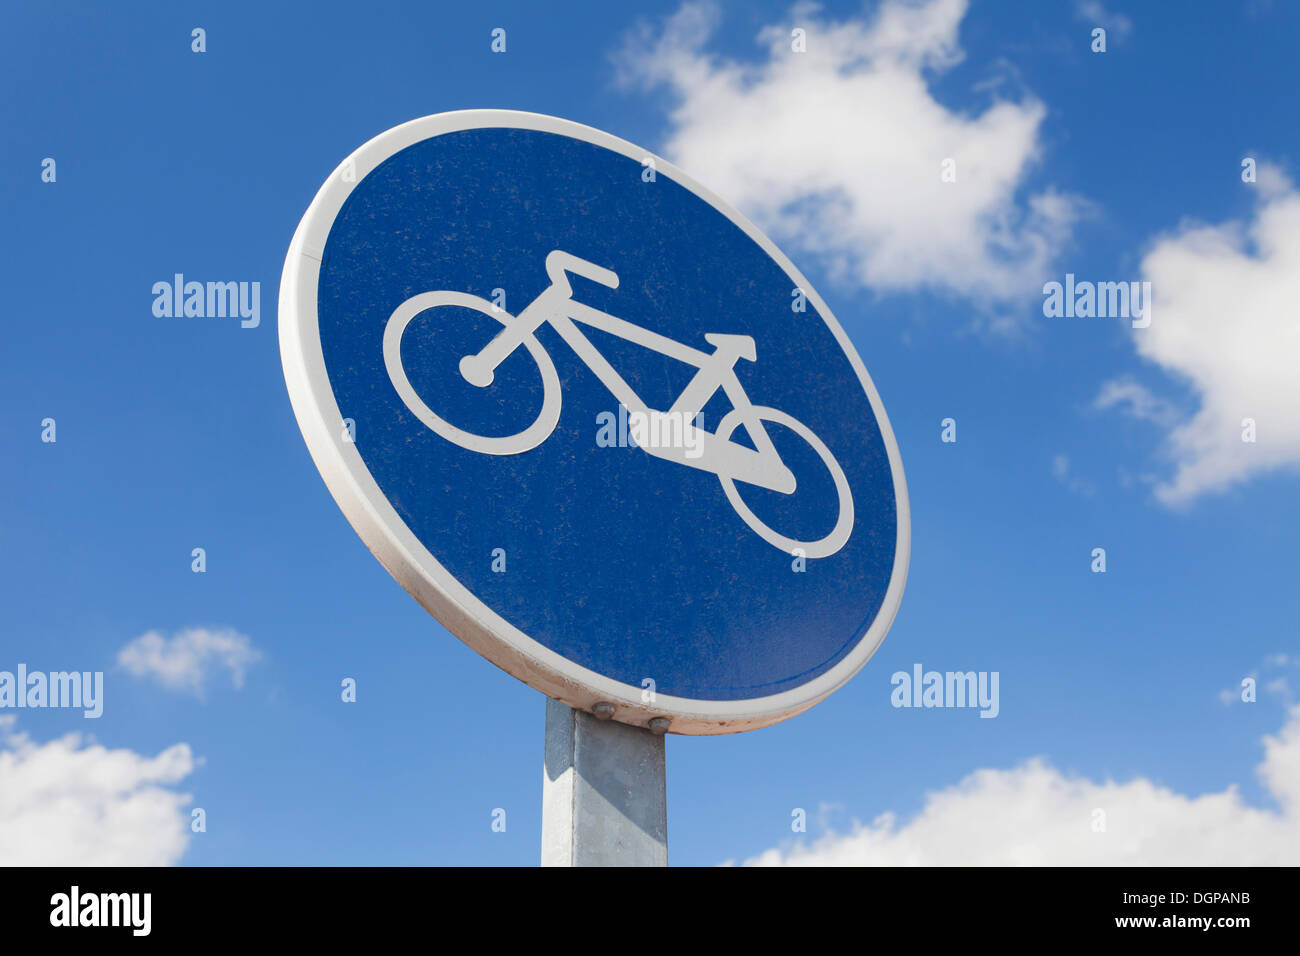 Sign for a bicycle path, Las Playitas, Fuerteventura, Canary Islands, Spain Stock Photo